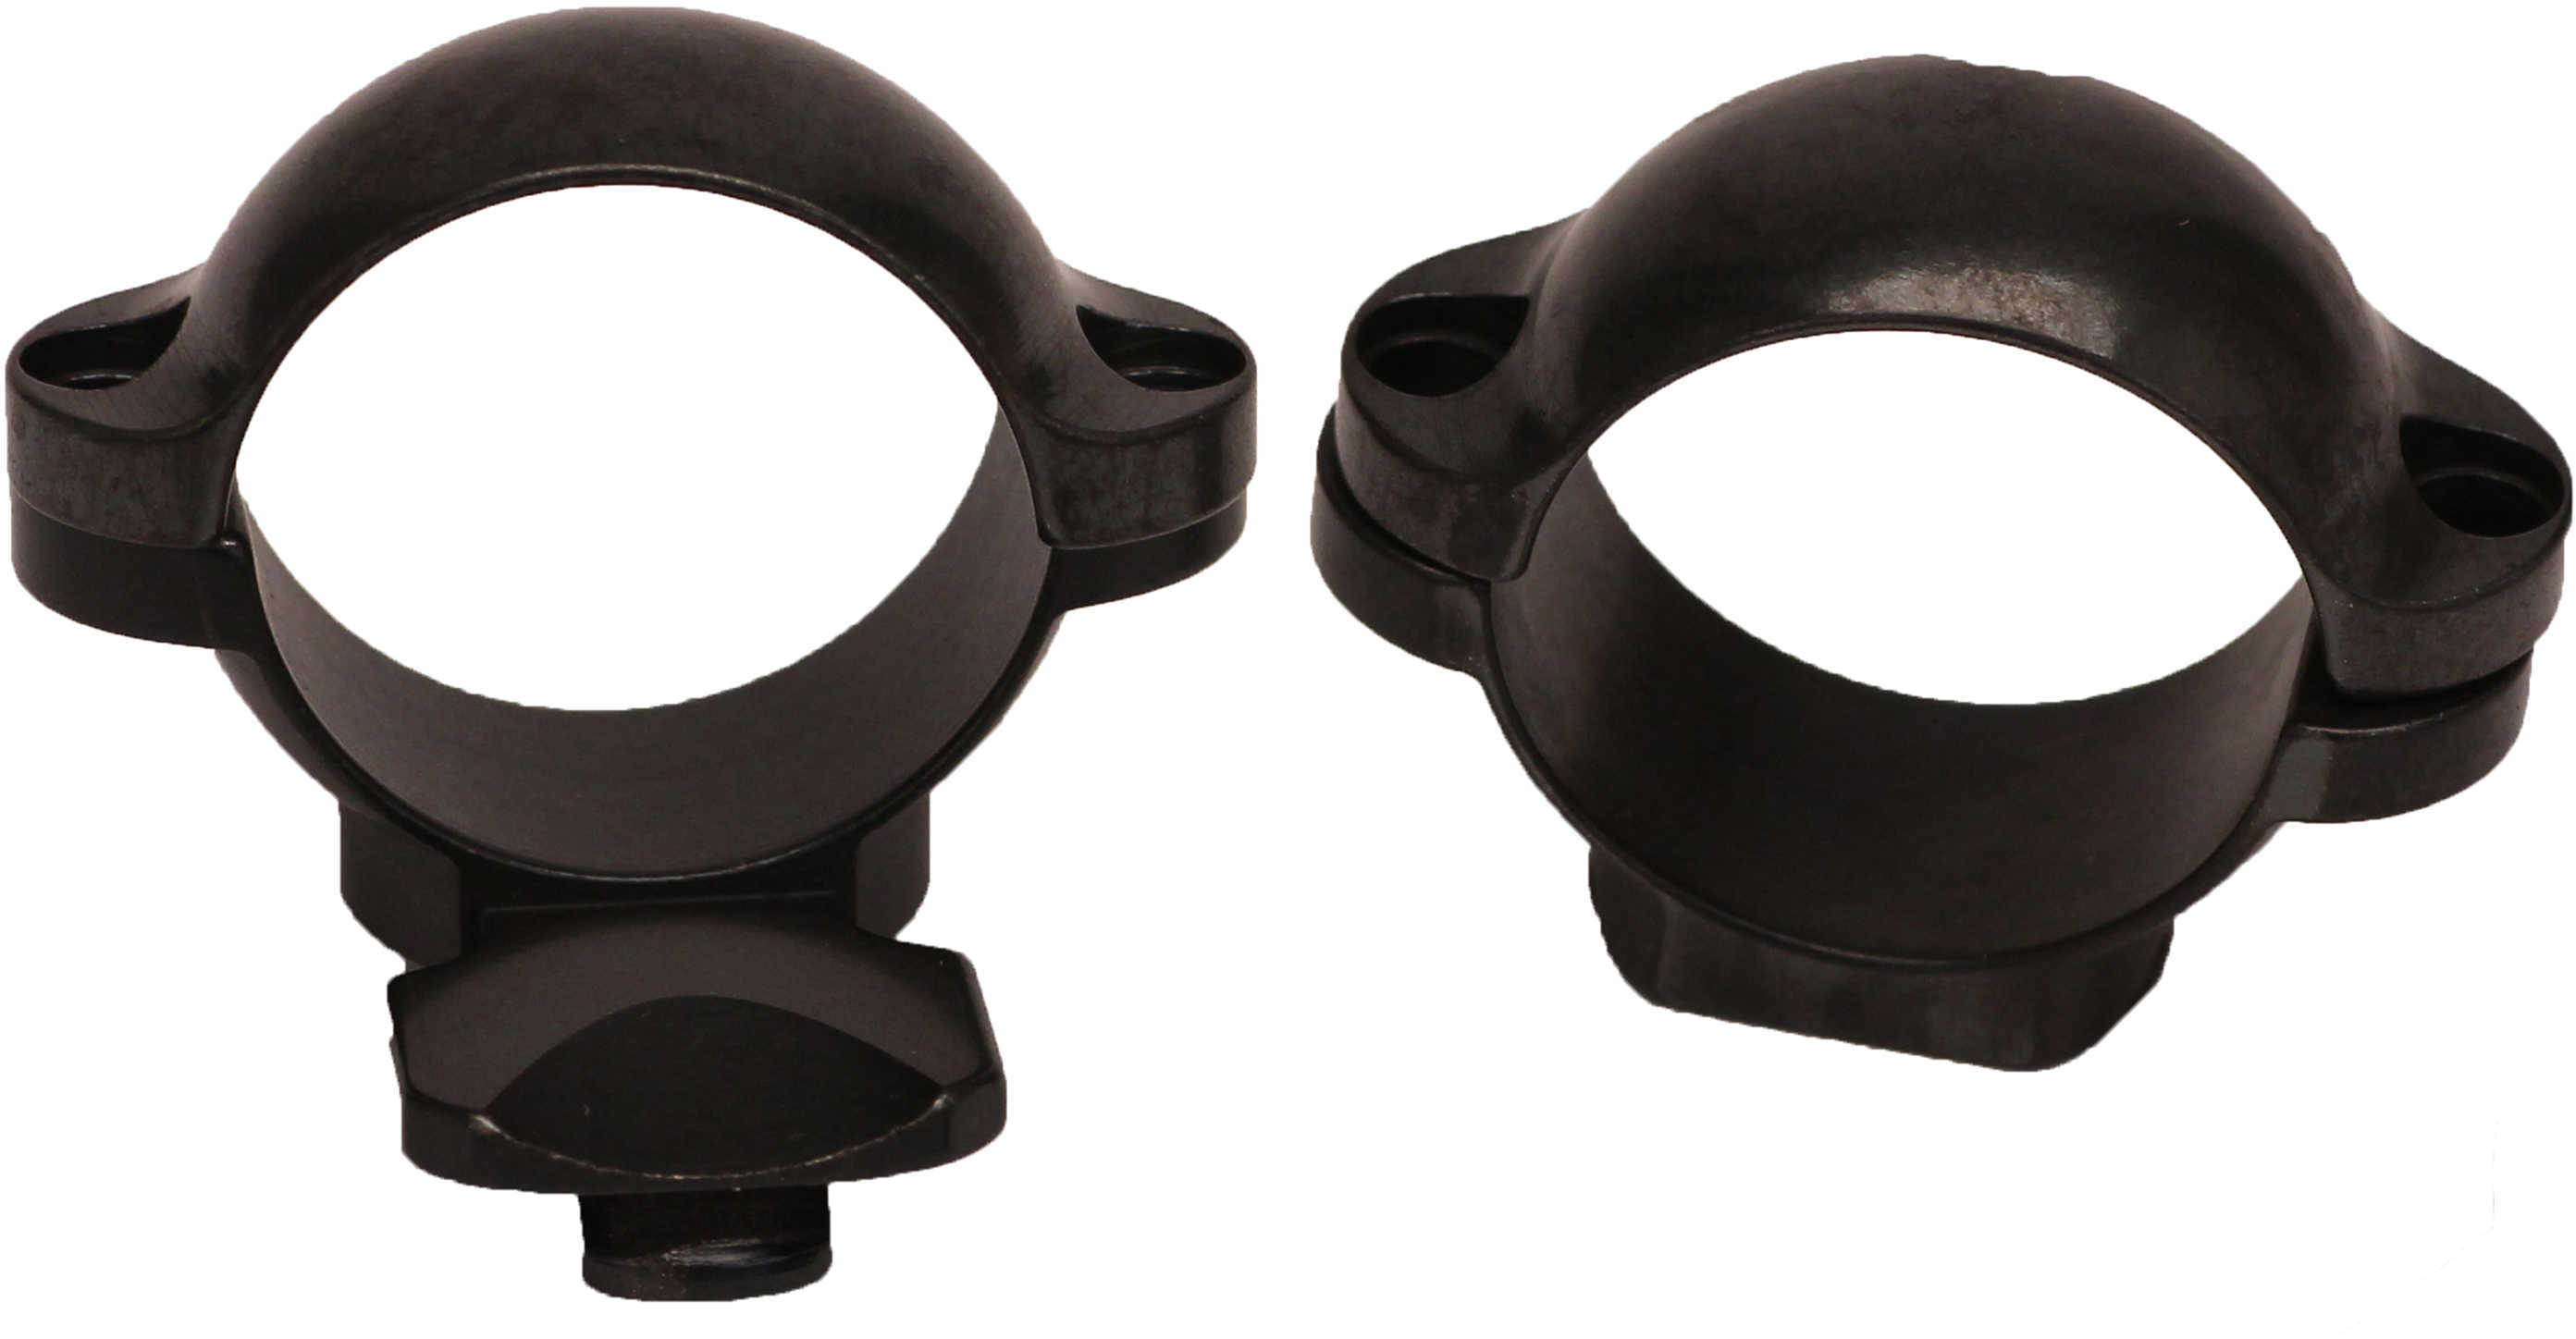 Leupold High Extension Rings With Matte Black Finish Md: 49913